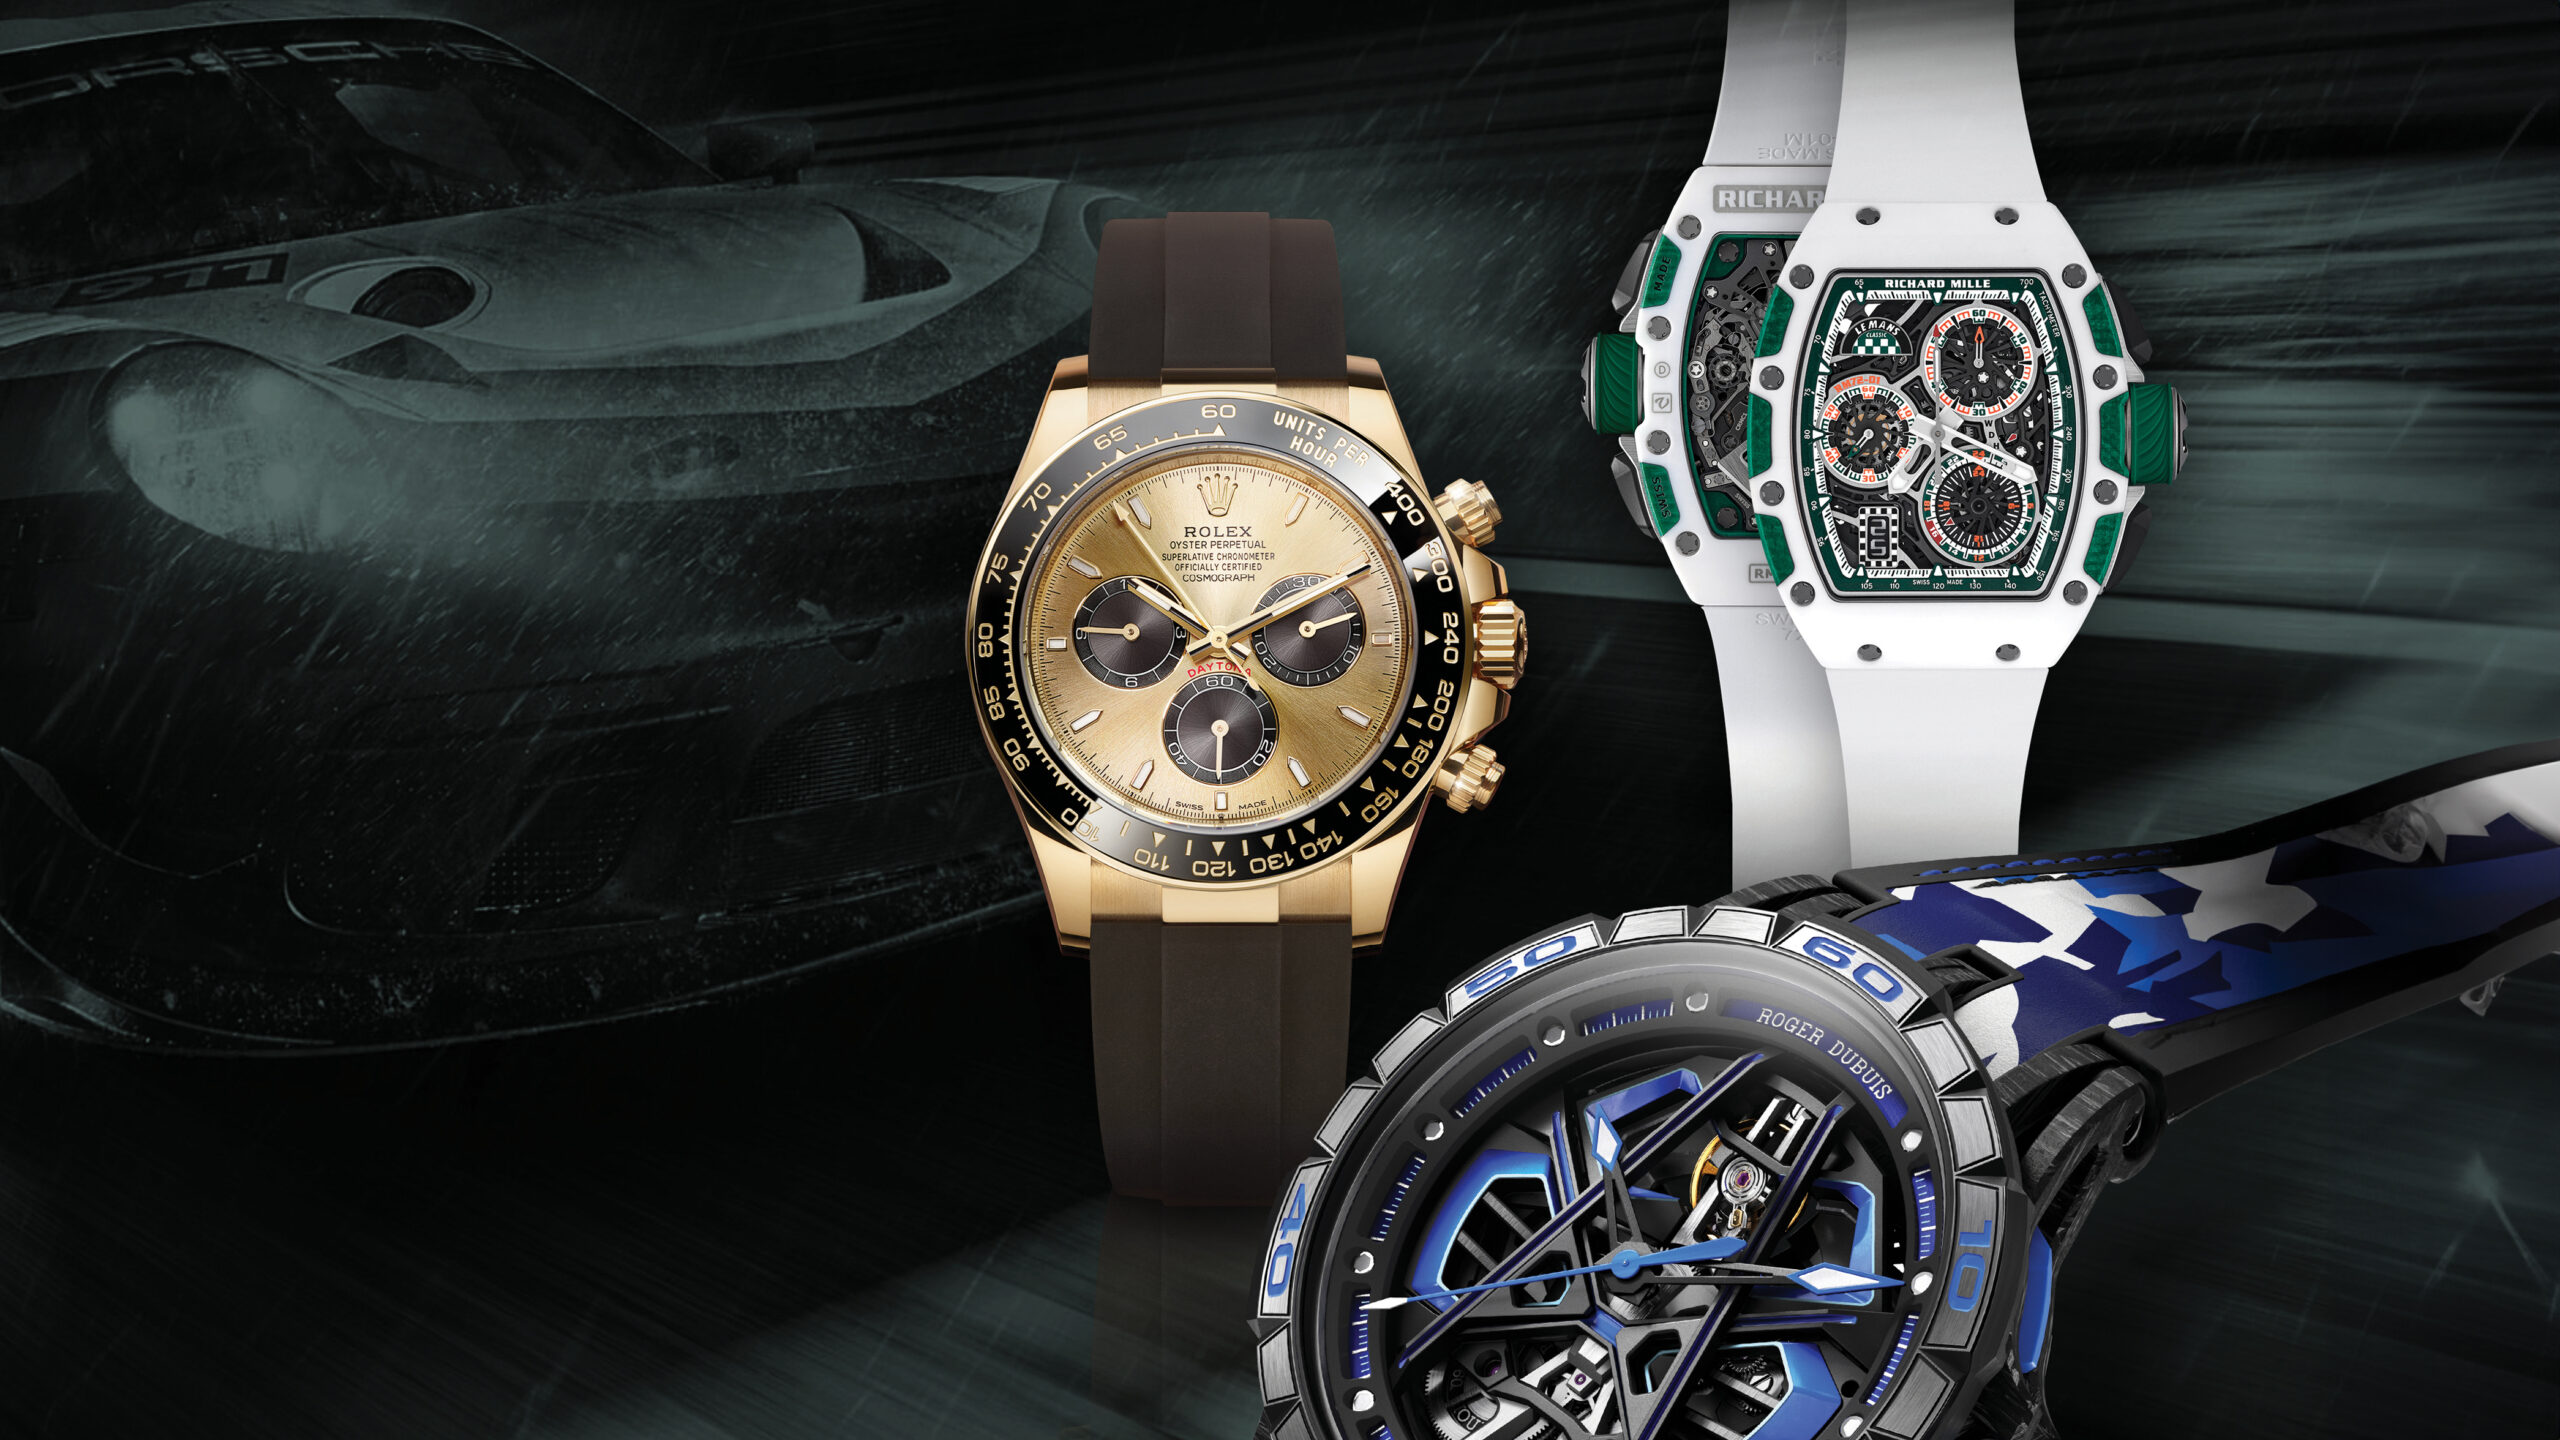 Track Stars: Winning watches inspired by supercars past and present